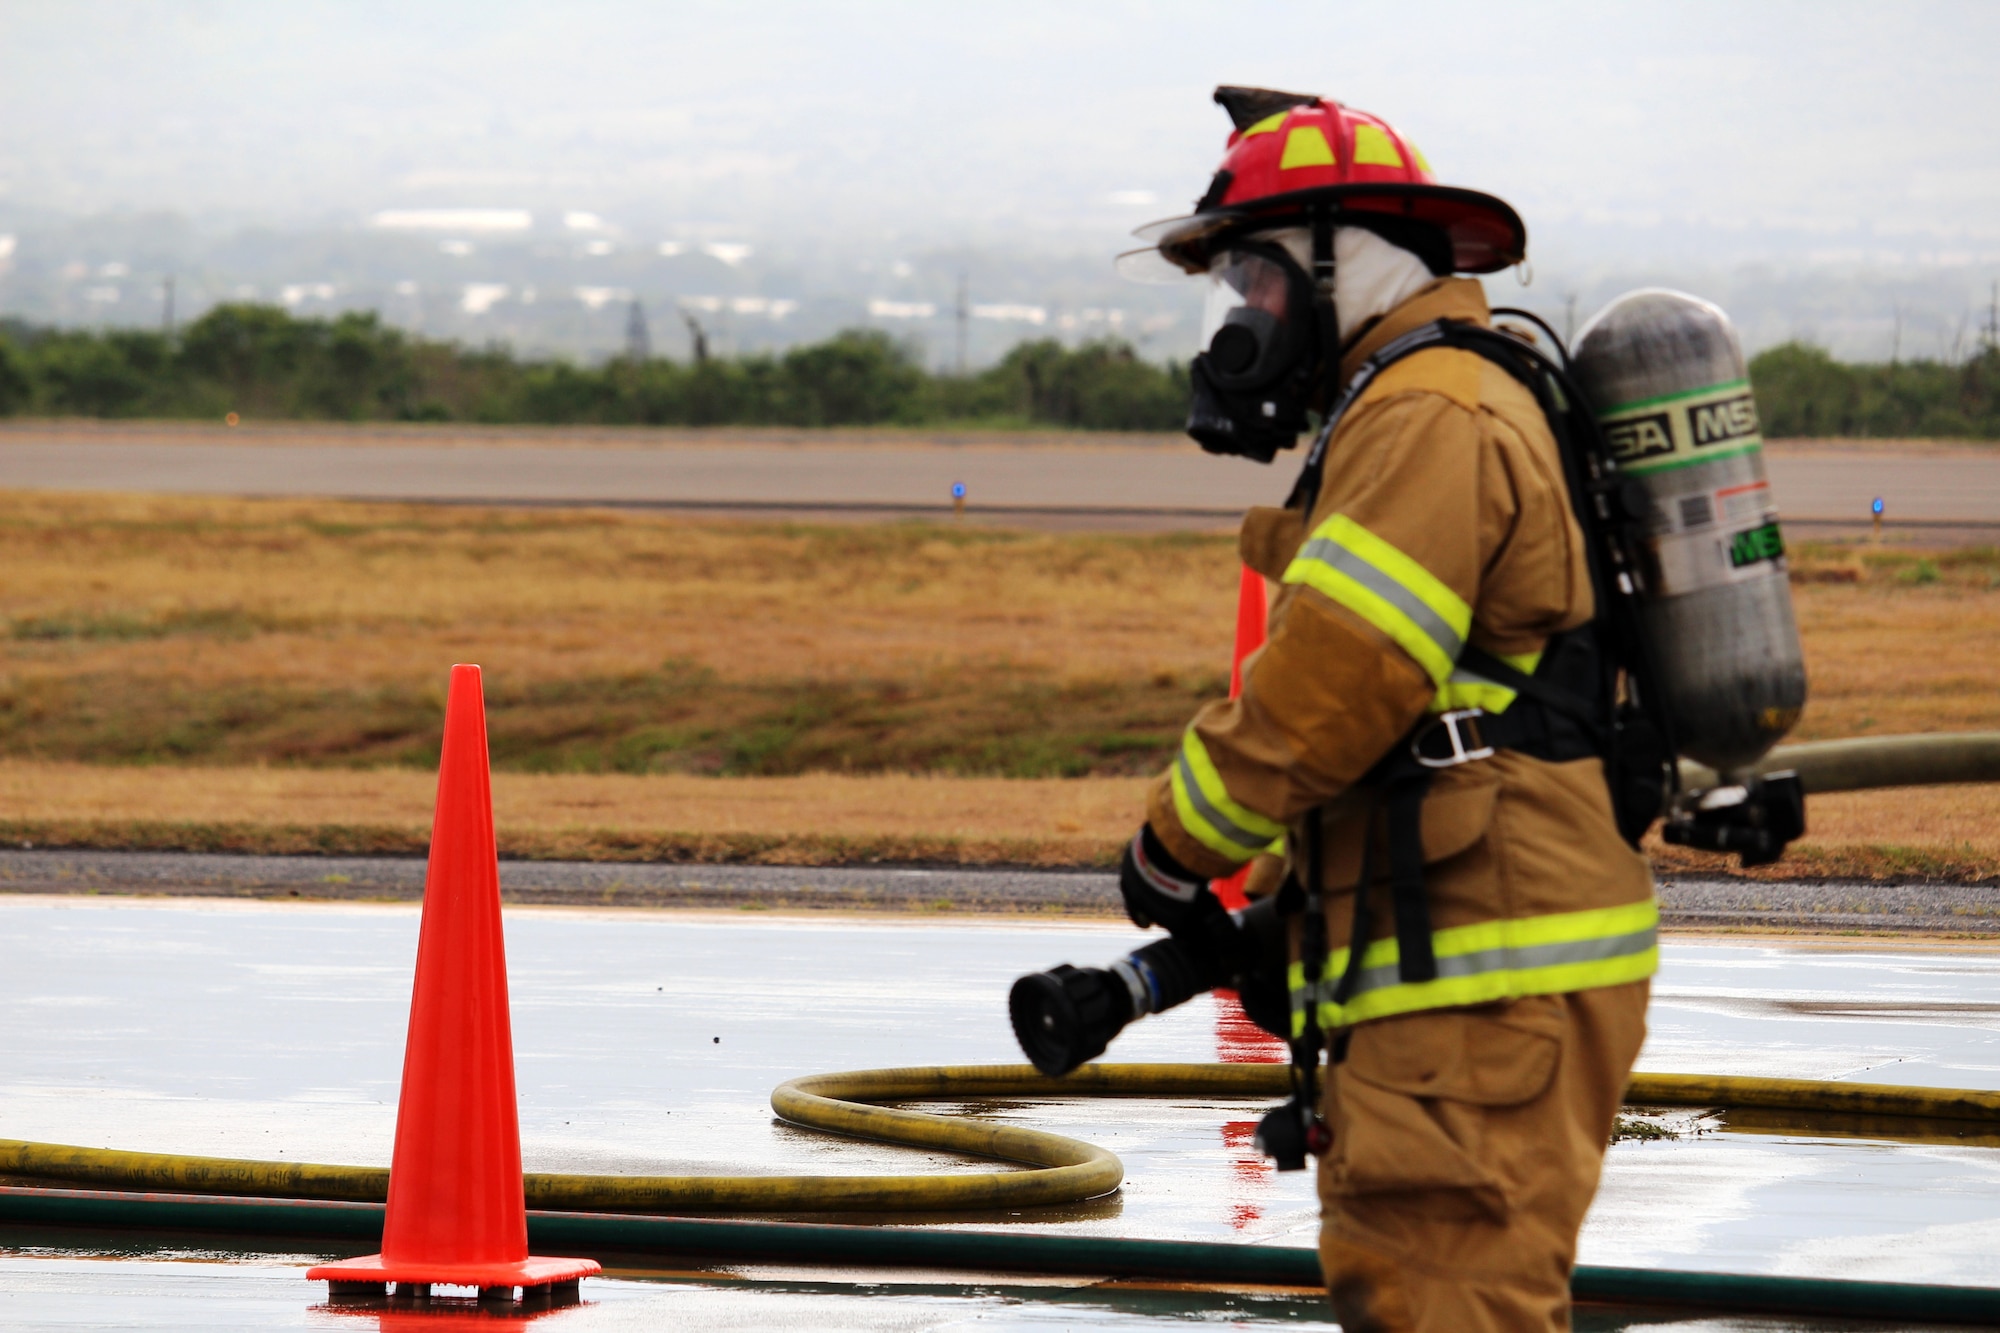 SOTO CANO AIR BASE, Honduras - Miguel Matus, a firefighter form the Belize nNational Fire Service, prepares for a mobile aircraft fire practice Aug. 26, 2015, during CENTAM SMOKE, a quarterly firefighting exercise hosted by Joint Task Force-Bravo at Soto Cano Air Base, Honduras. During this practice, students learned how to combat live fires in the cockpit, engine, fuselage and ground areas of the aircraft to build partnership and improve interoperability.  (U.S. Army photo by Maria Pinel)